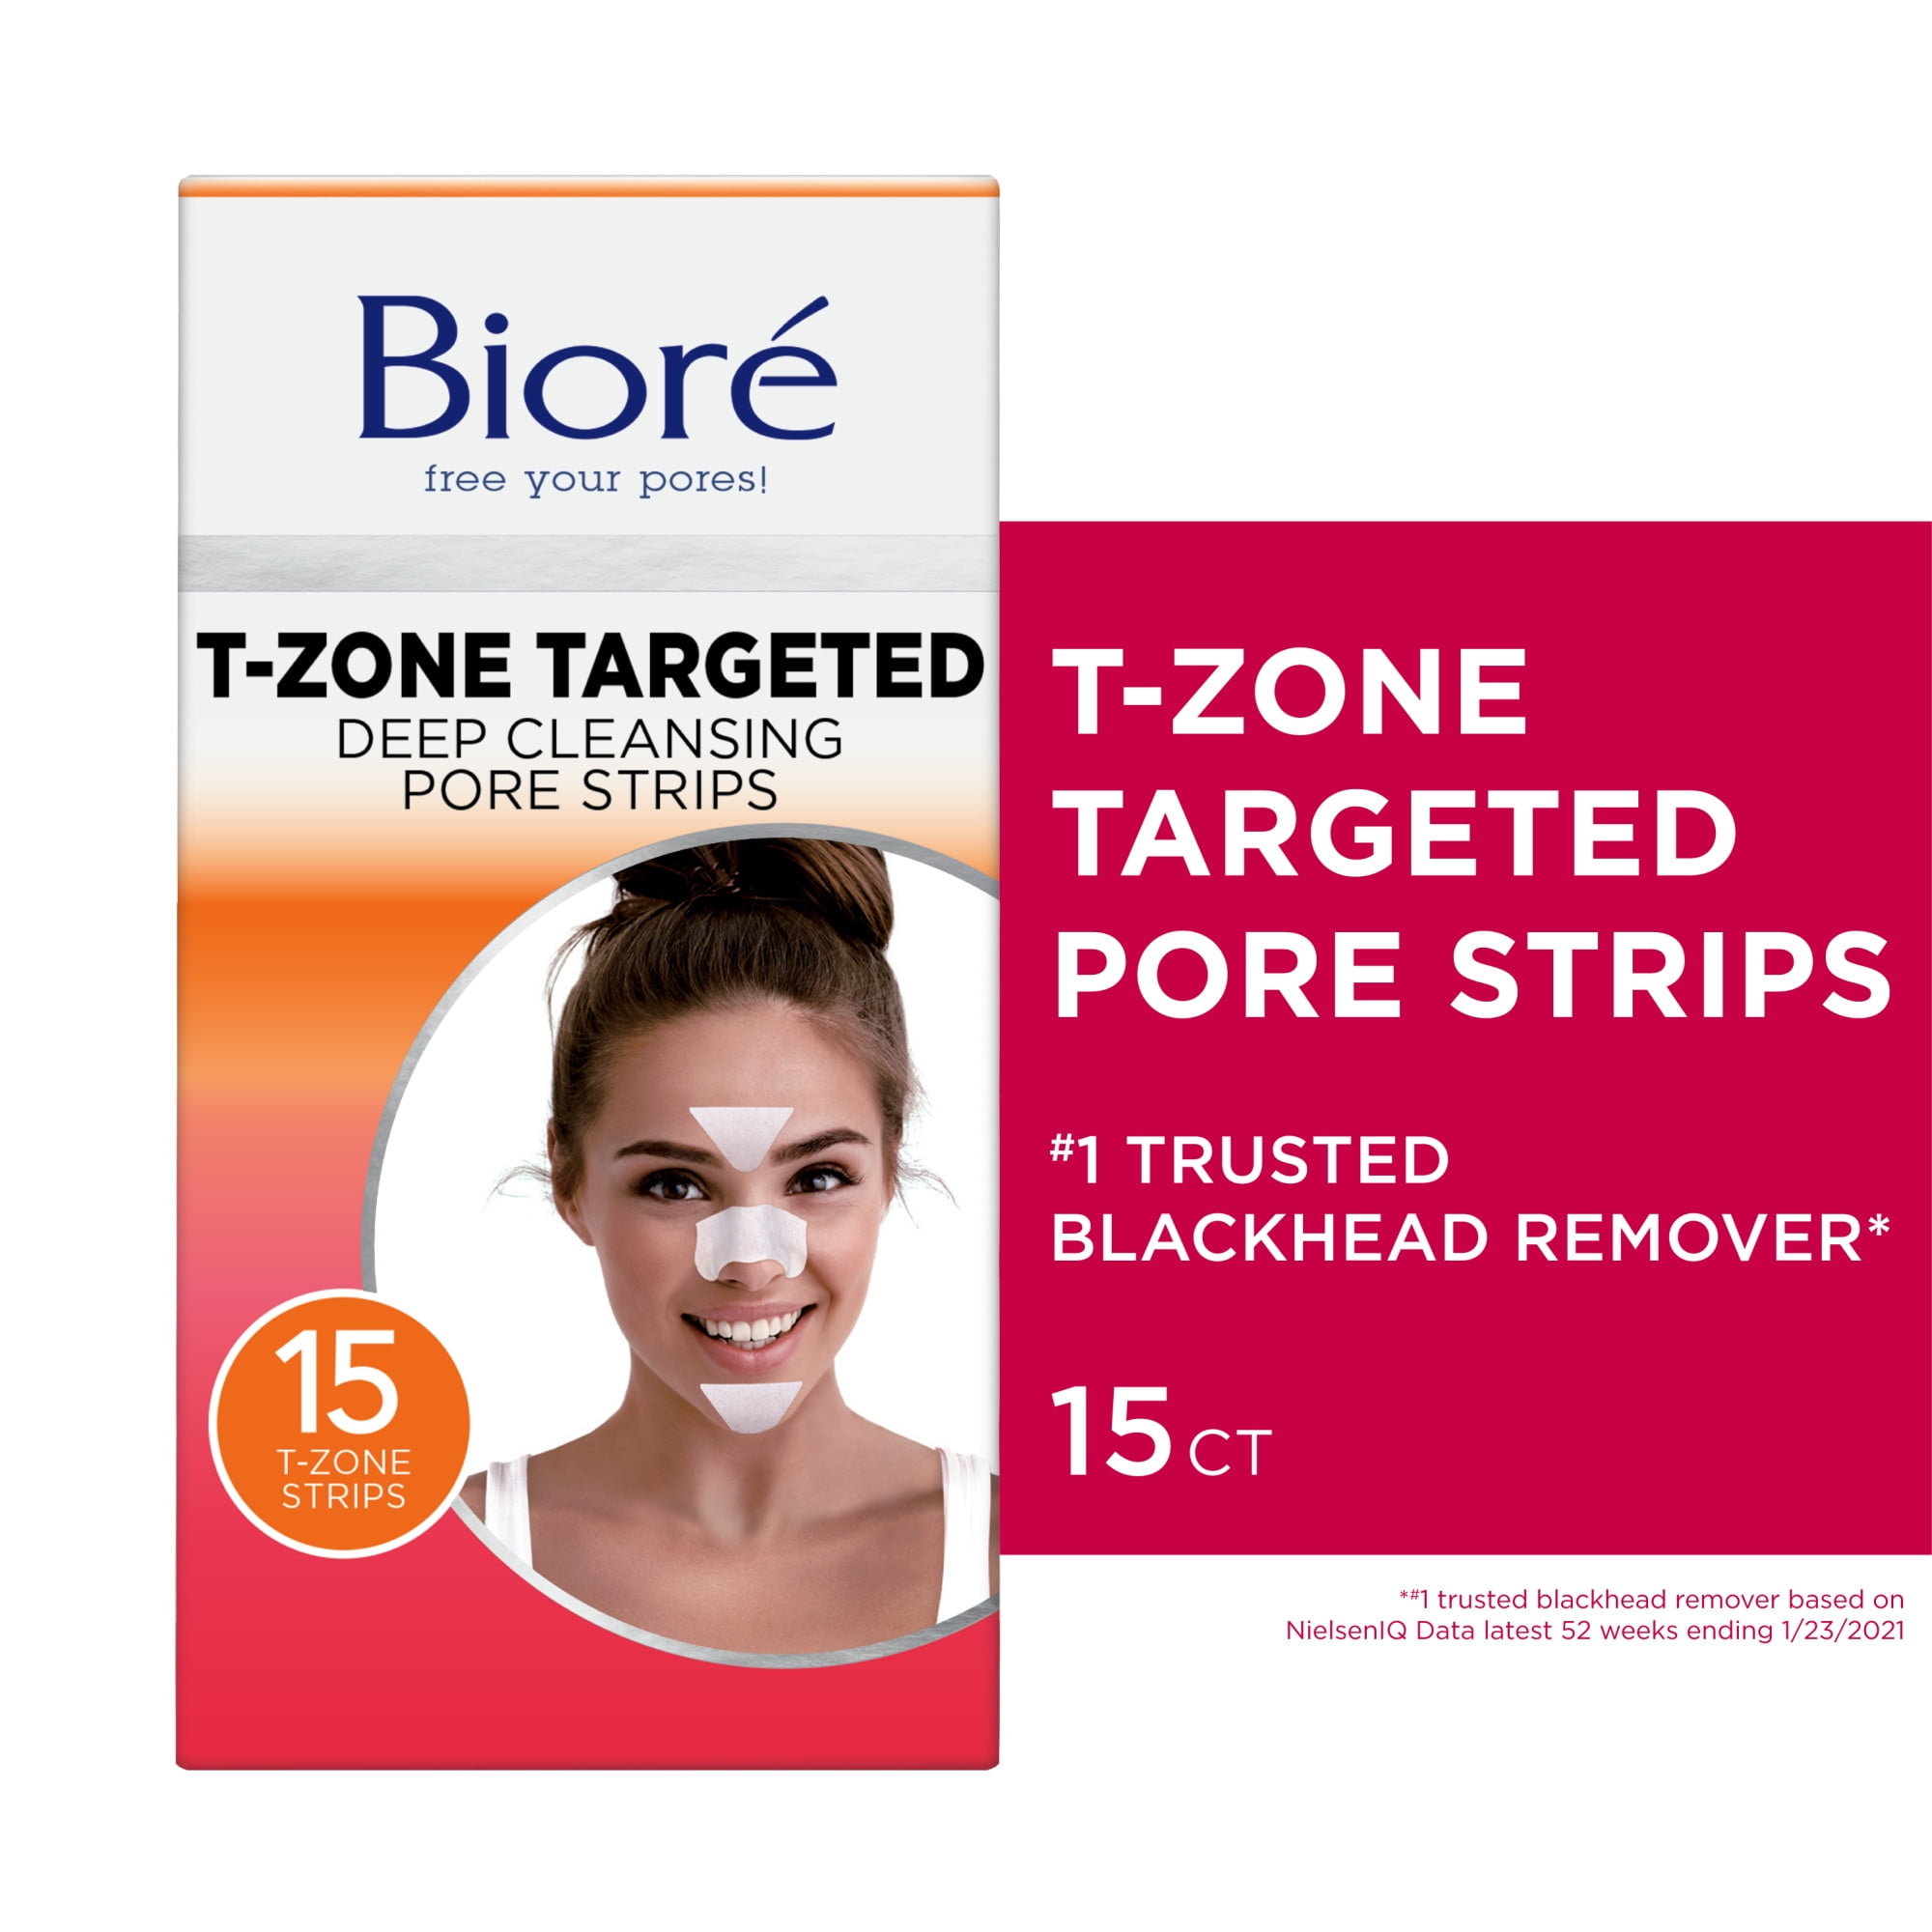 Bior T-Zone Targeted Deep Cleansing Blackhead Remover Pore Strips, 5 Nose + 5 Face + 5 Chin Strips, 15 Ct